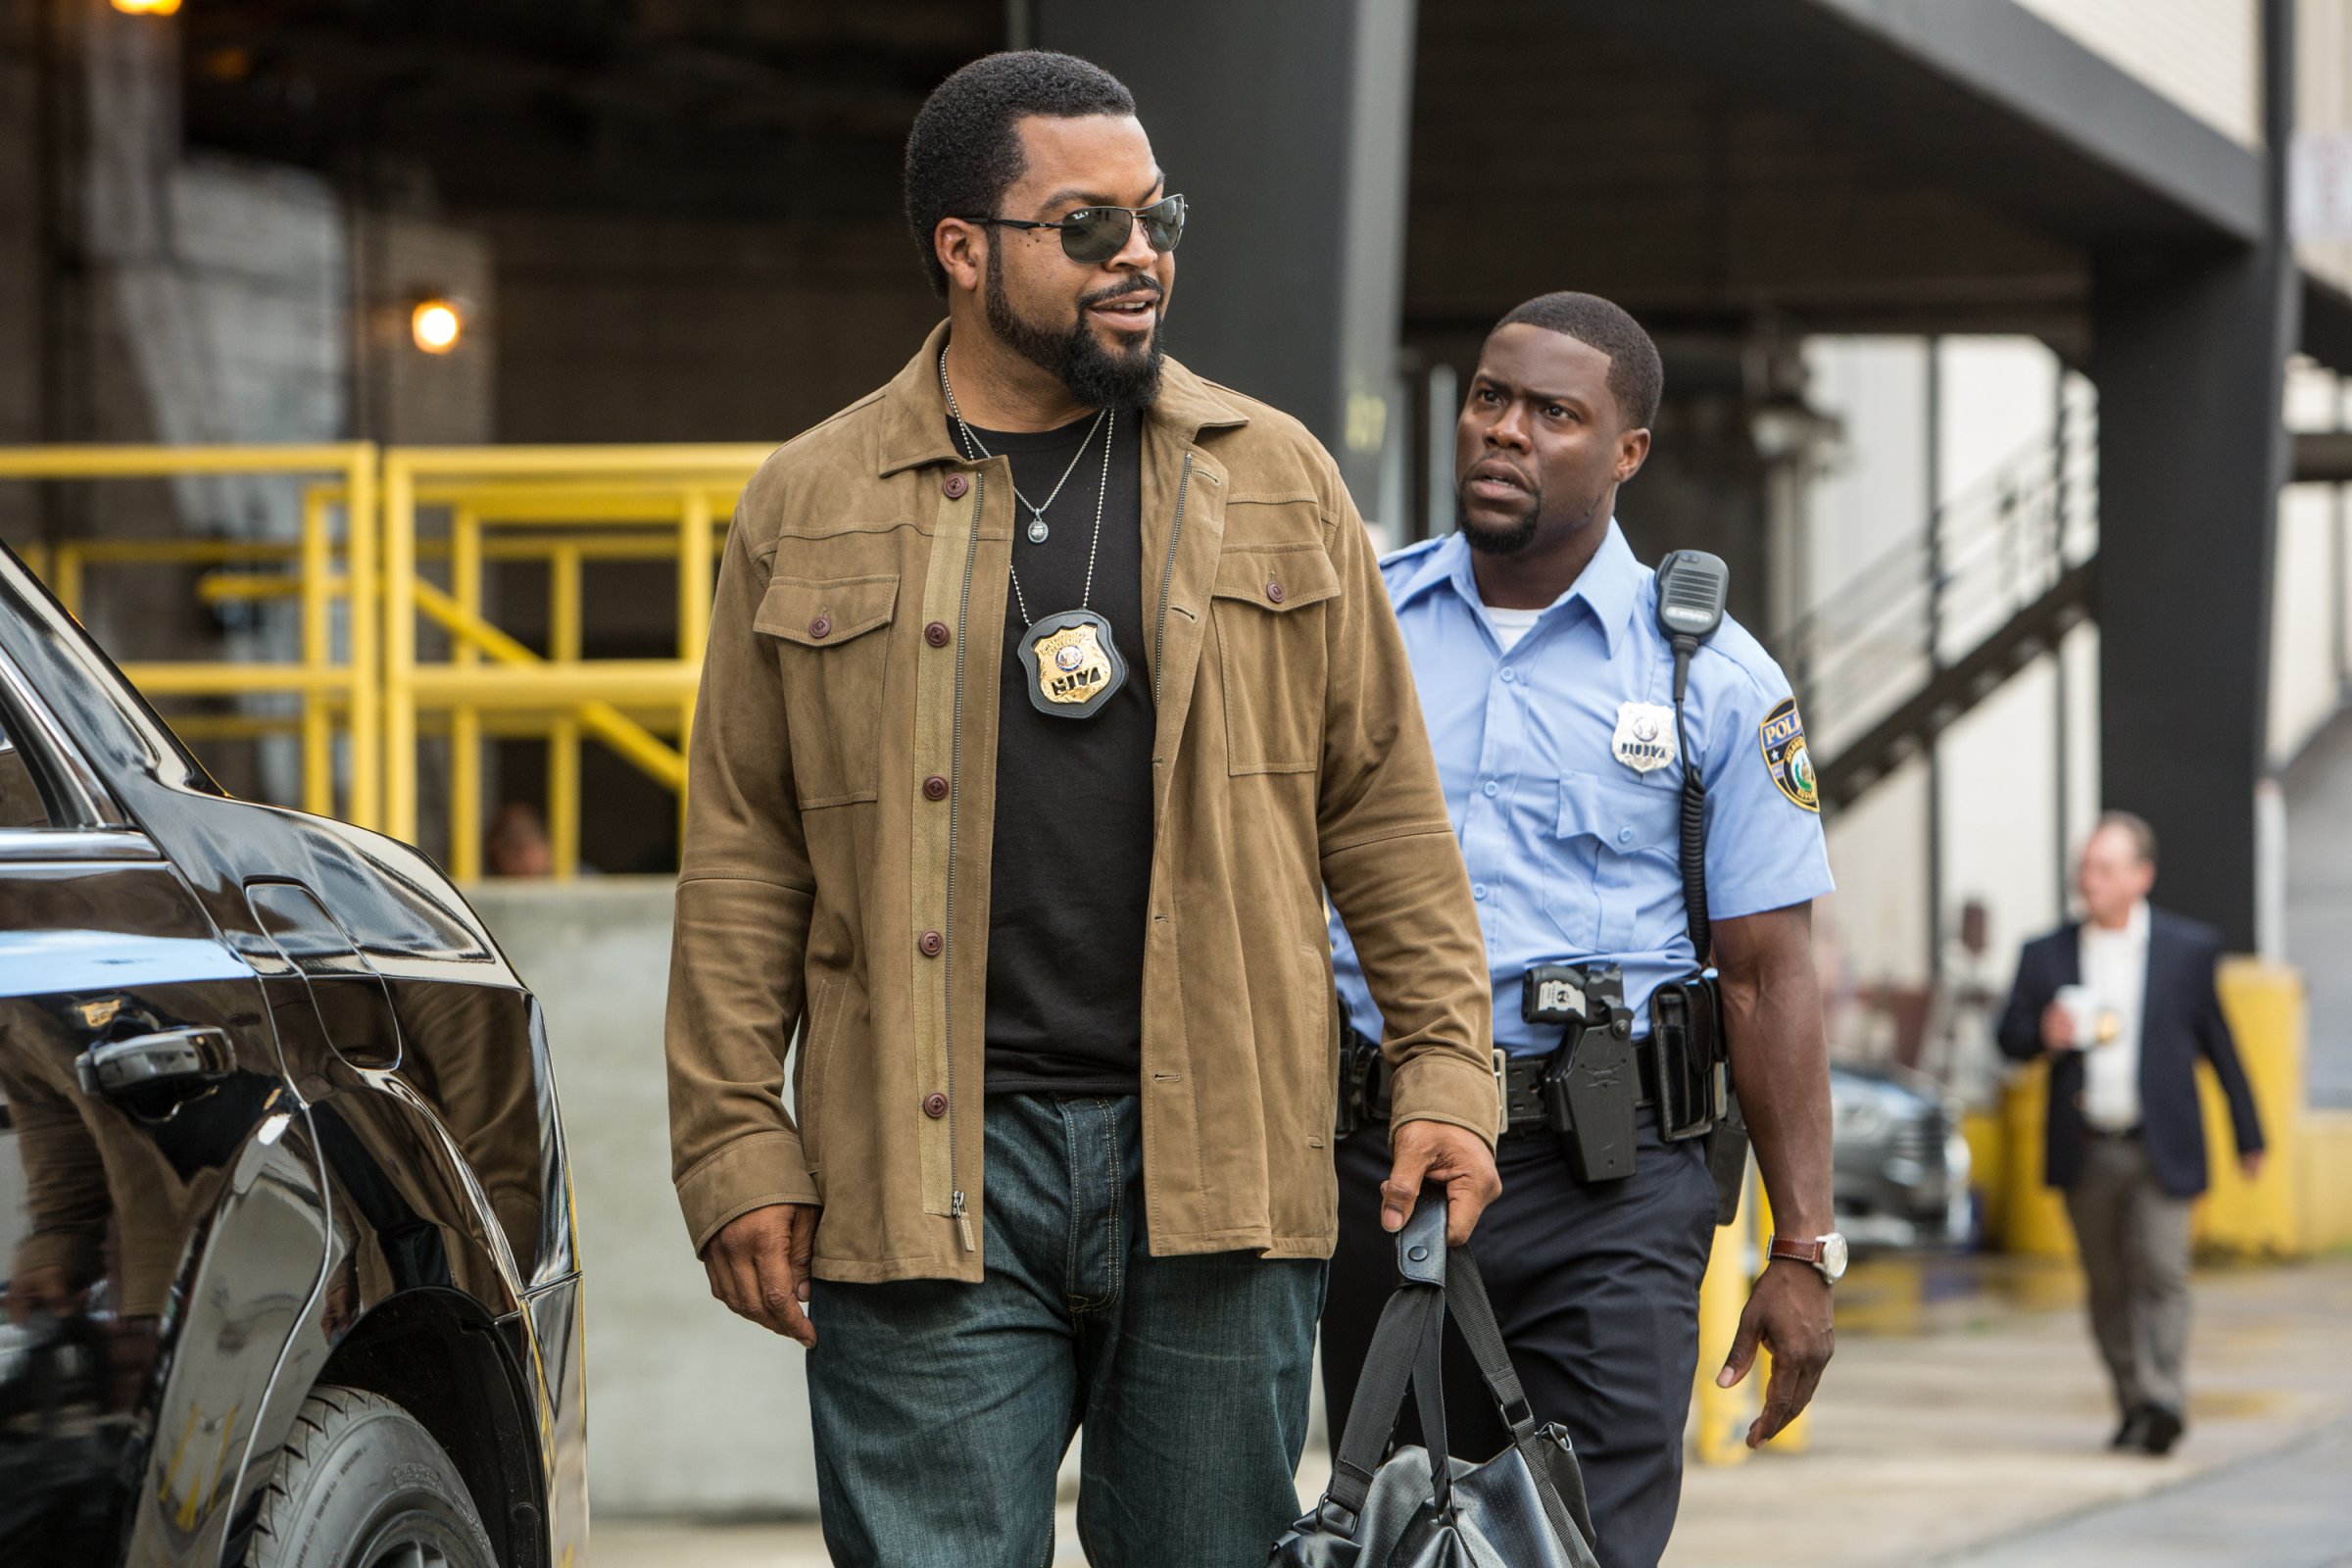 Ice Cube, left, as James Payton and Kevin Hart, right, as Ben Barber in a scene from Ride Along 2.